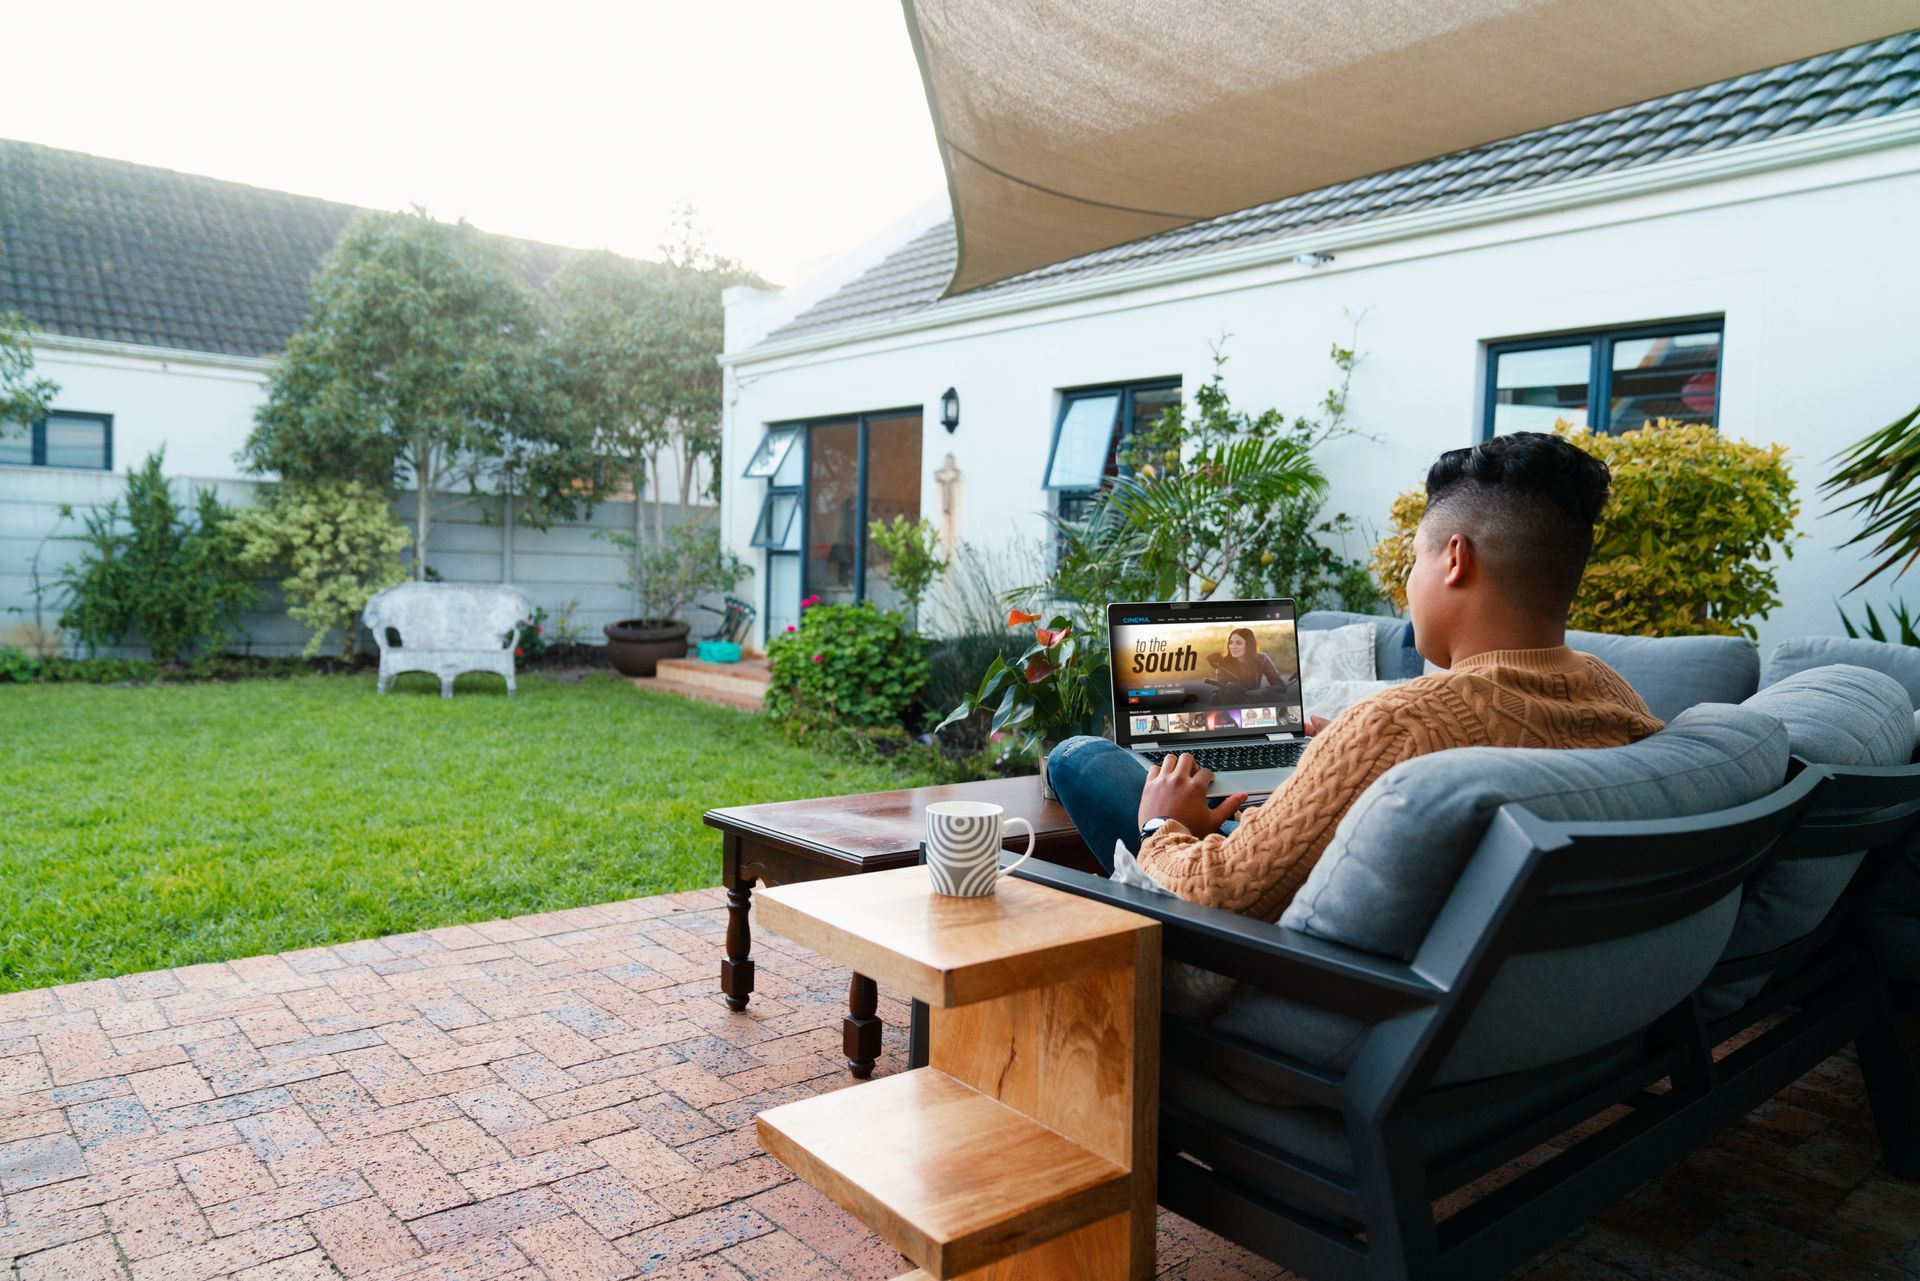 a man is sitting on a couch in a backyard using a laptop computer .